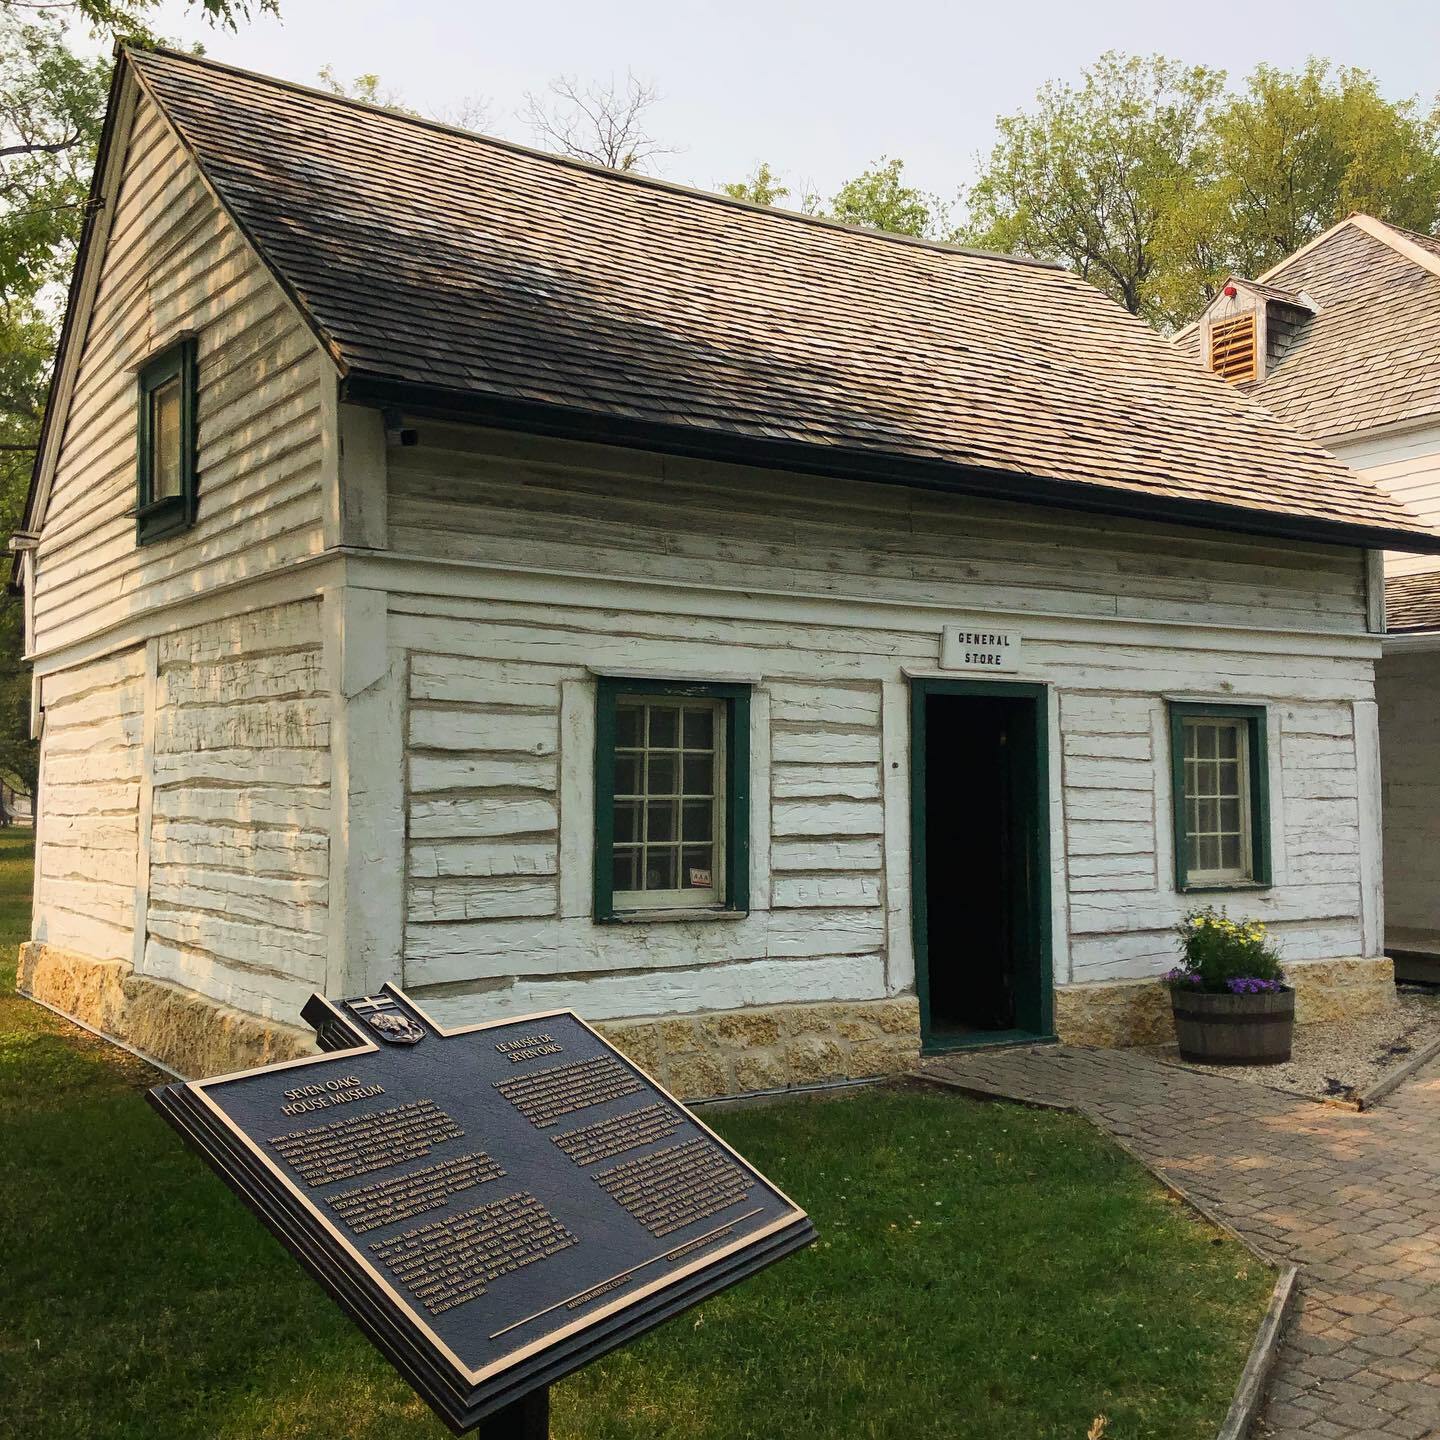 John Inkster's General Store (built c.1831) and historic marker at Seven Oaks House Museum Provincial Heritage Site in Winnipeg, Manitoba.